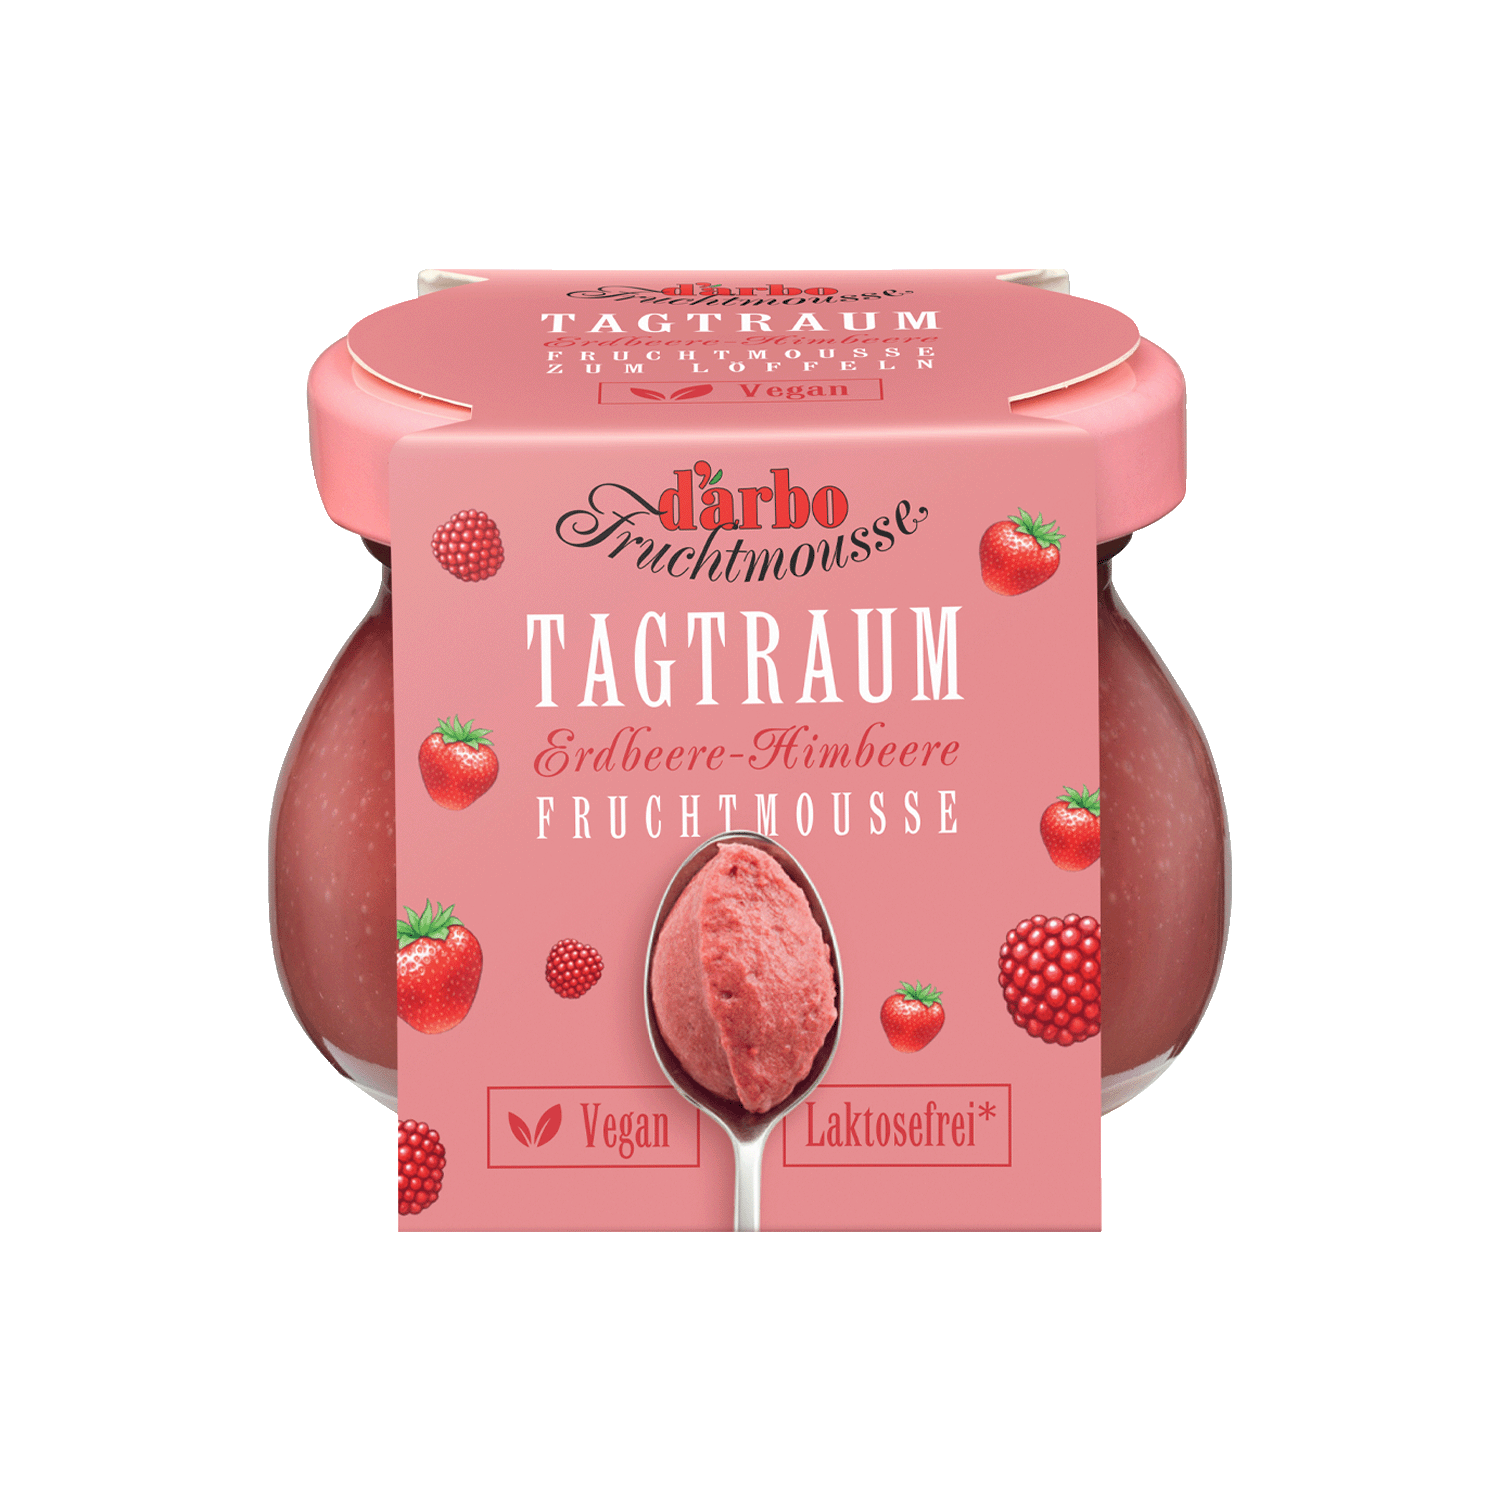 "Tagtraum" Fruit mousse Strawberry-Raspberry, 90g